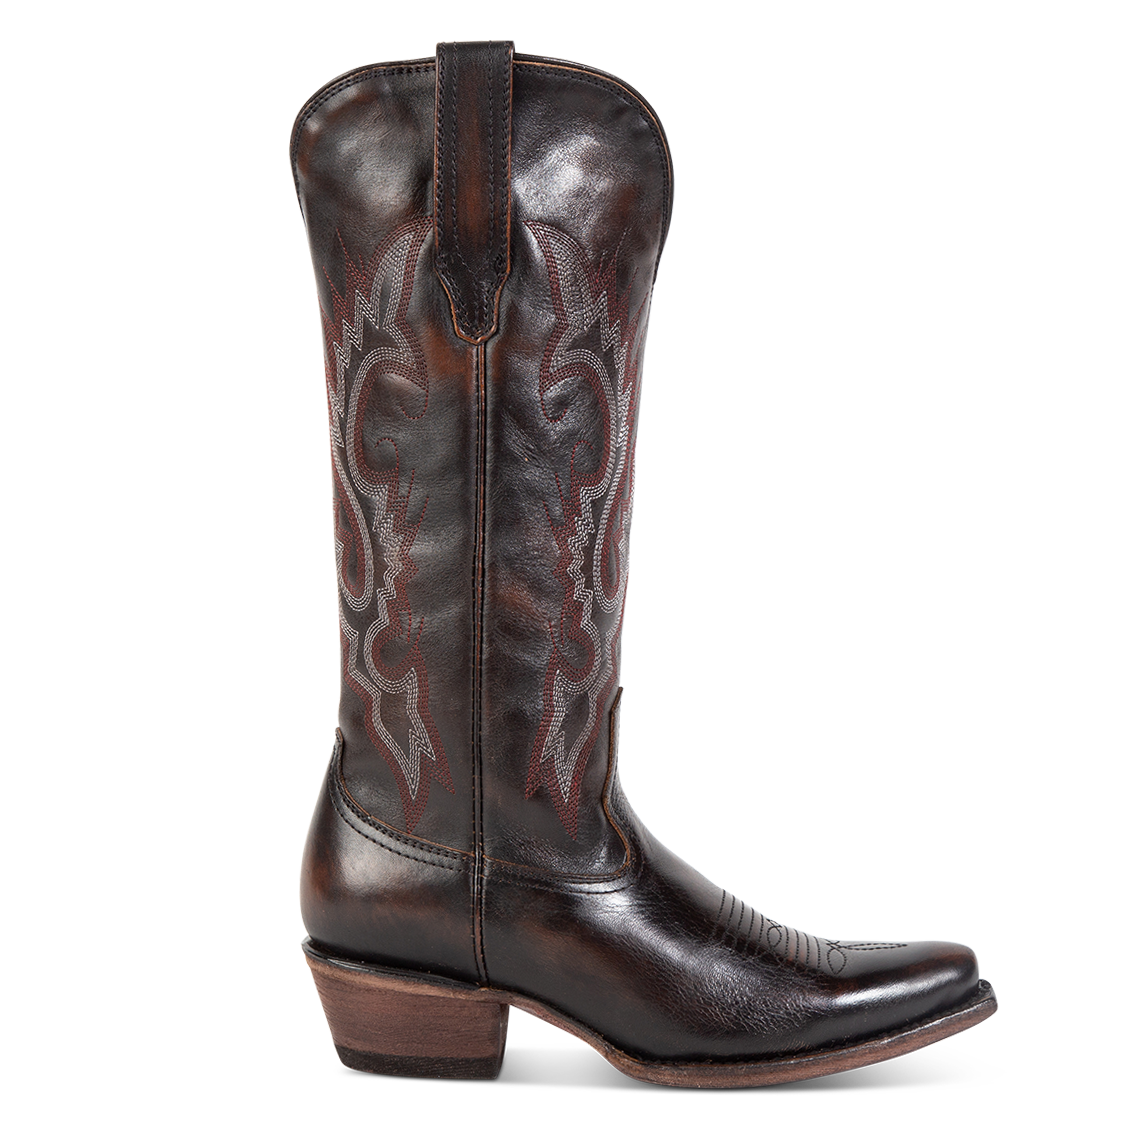 FREEBIRD women's Woodland black leather cowboy boot with stitch detailing and snip toe construction